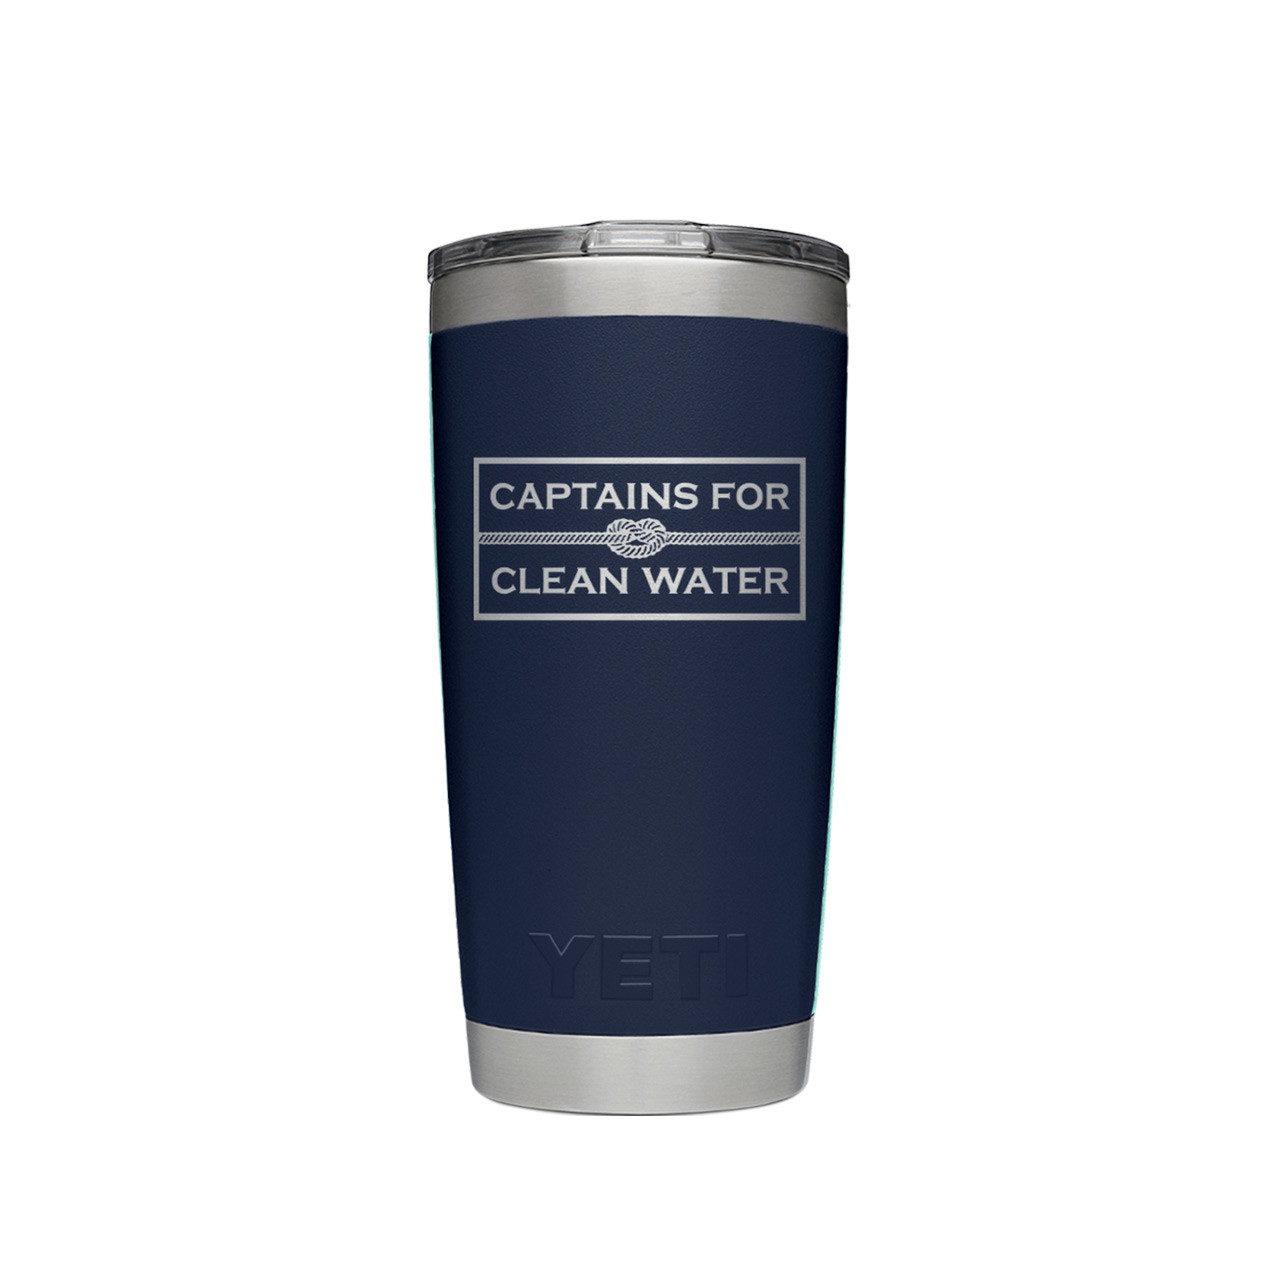 https://captainsforcleanwater.org/wp-content/uploads/2020/07/Image-of-captains-for-clean-water-engraved-yeti-rambler-20oz-tumbler-navy.jpg